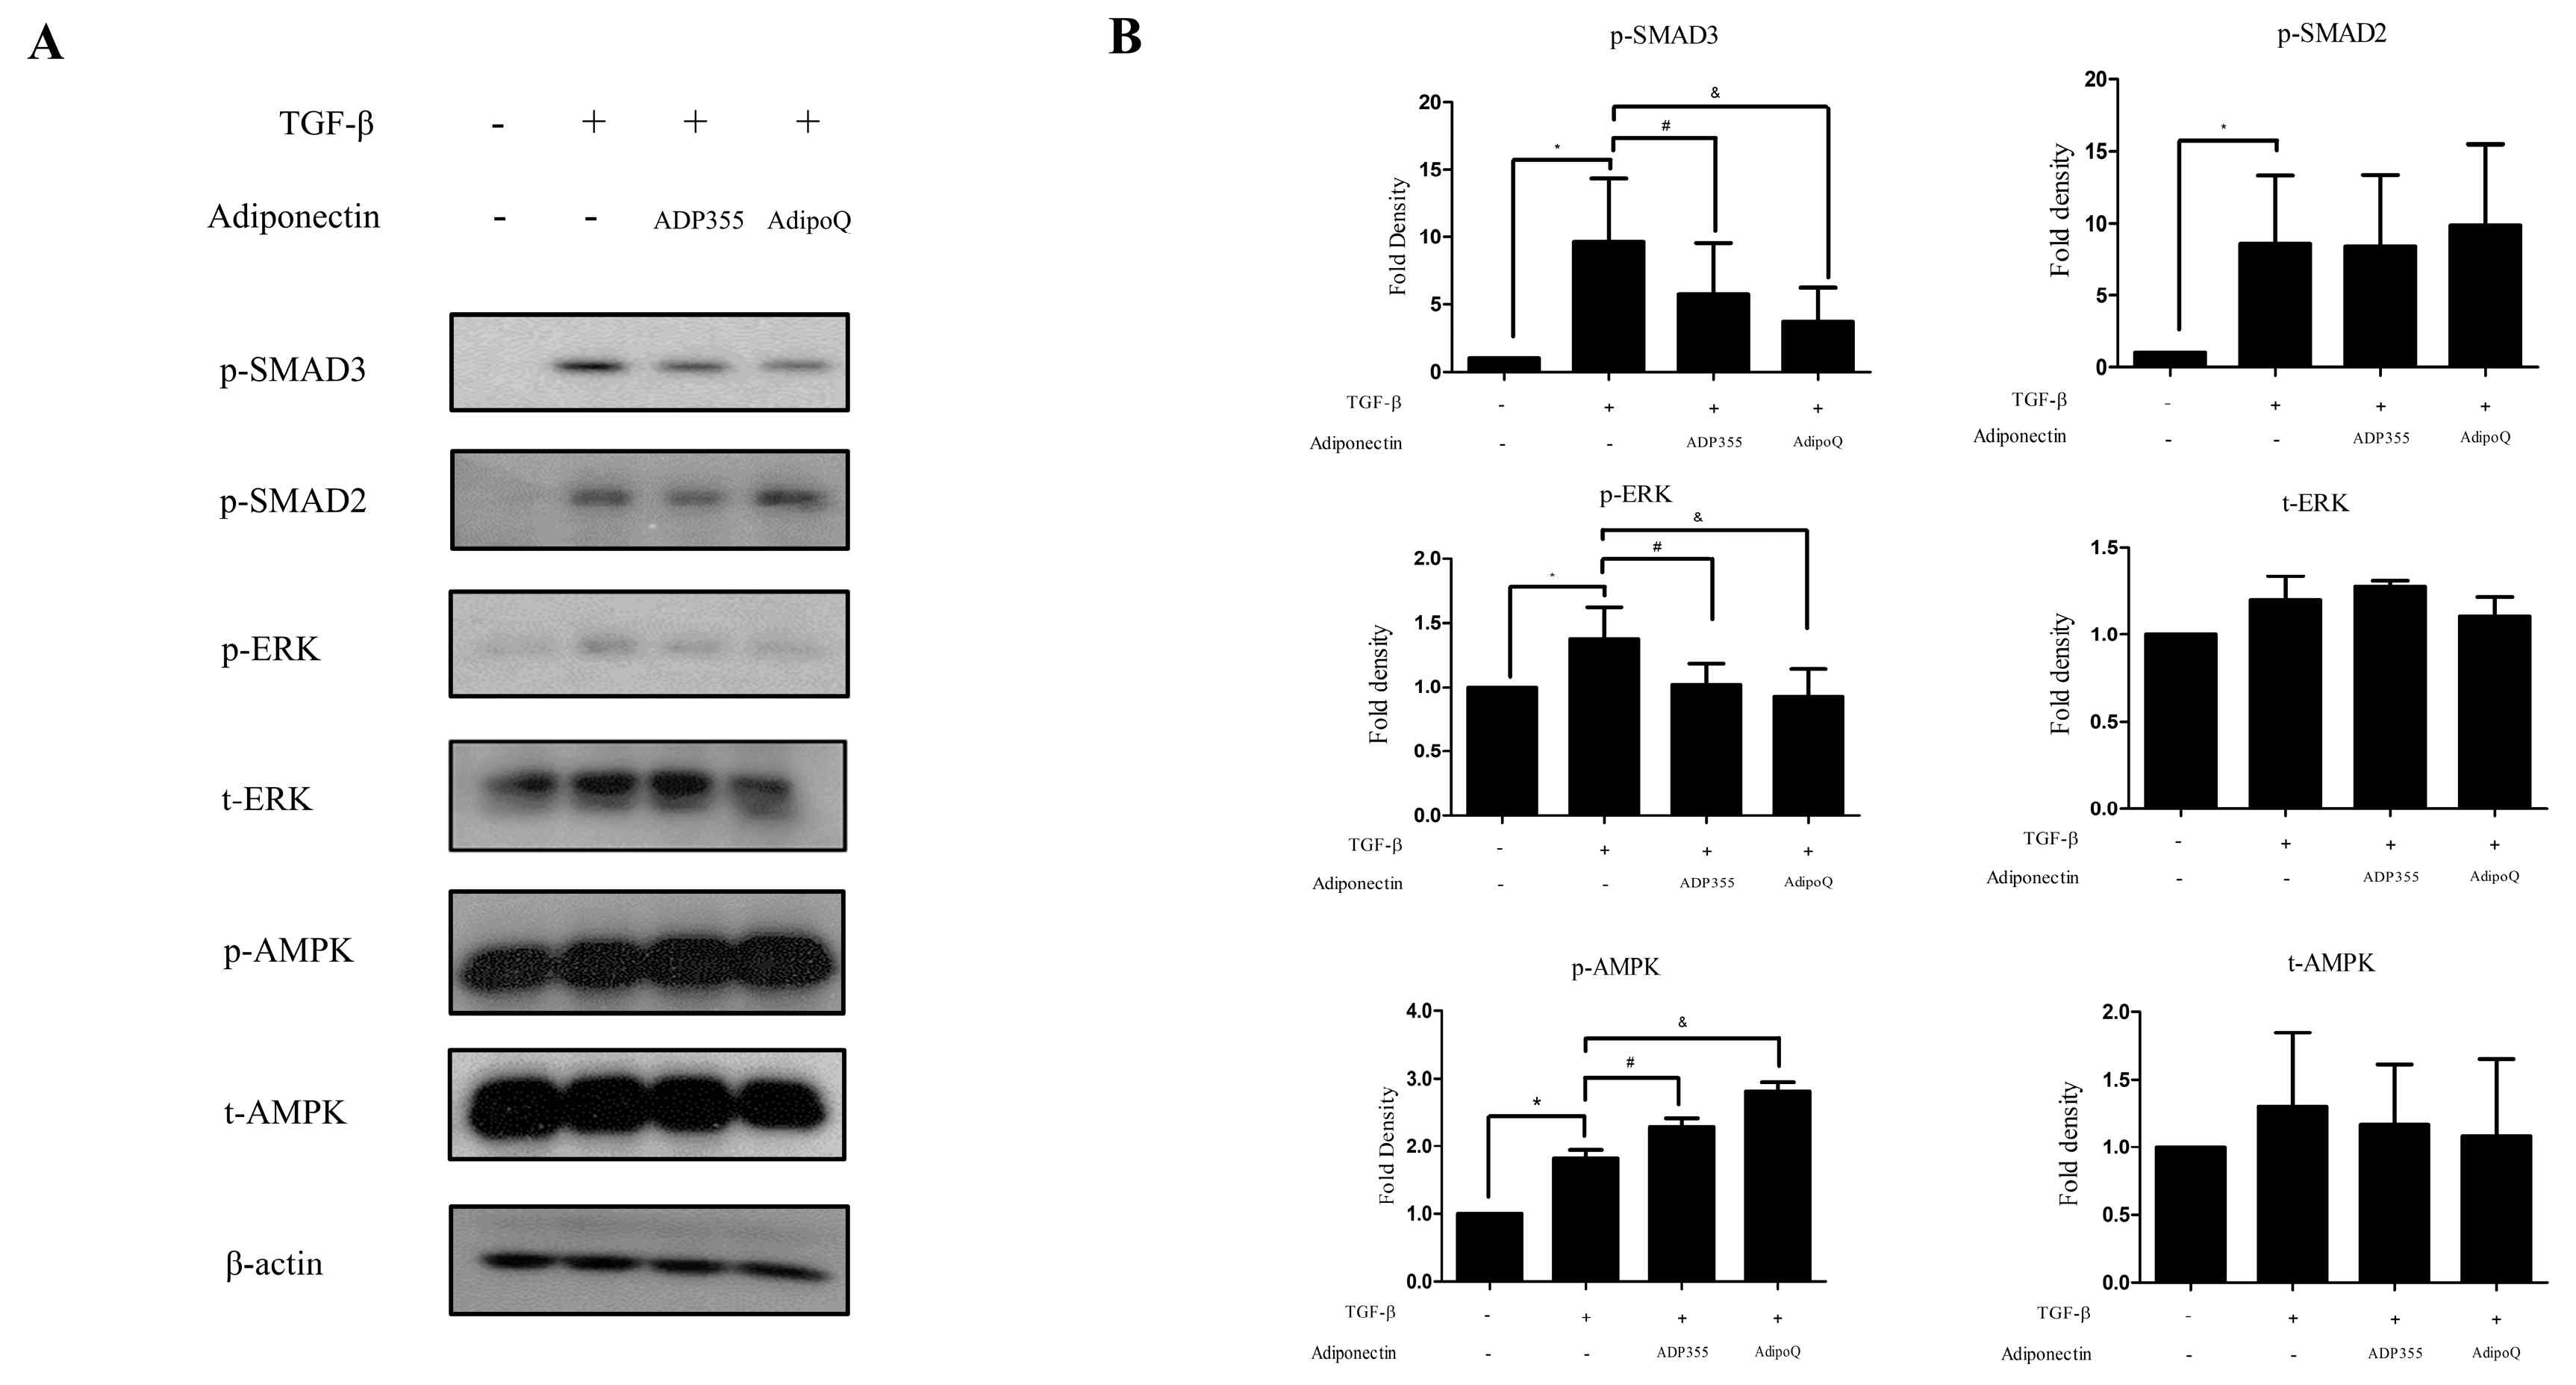 Effect of ADP355 on the TGF-1-induced downstream pathways. TGF-1-induced increases in phosphorylation of SMAD2, SMAD3, ERK, and AMPK. Treatment with ADP355 (10 g/mL) and adiponectin recombinant, AdipoQ(10 g/mL), reversed TGF-1-induced phosphorylation of SMAD3 and ERK and accentuated phosphorylation of AMPK. (A) Western blot analysis results. (B) Quantification of western blot results(* p 0.05, control vs. TGF-, # p 0.05, TGF- vs. TGF- + ADP355, and & p 0.05, TGF-vs. TGF-+ AdipoQ). The data are expressed as mean SD. Representative data are shown from three independent experiments